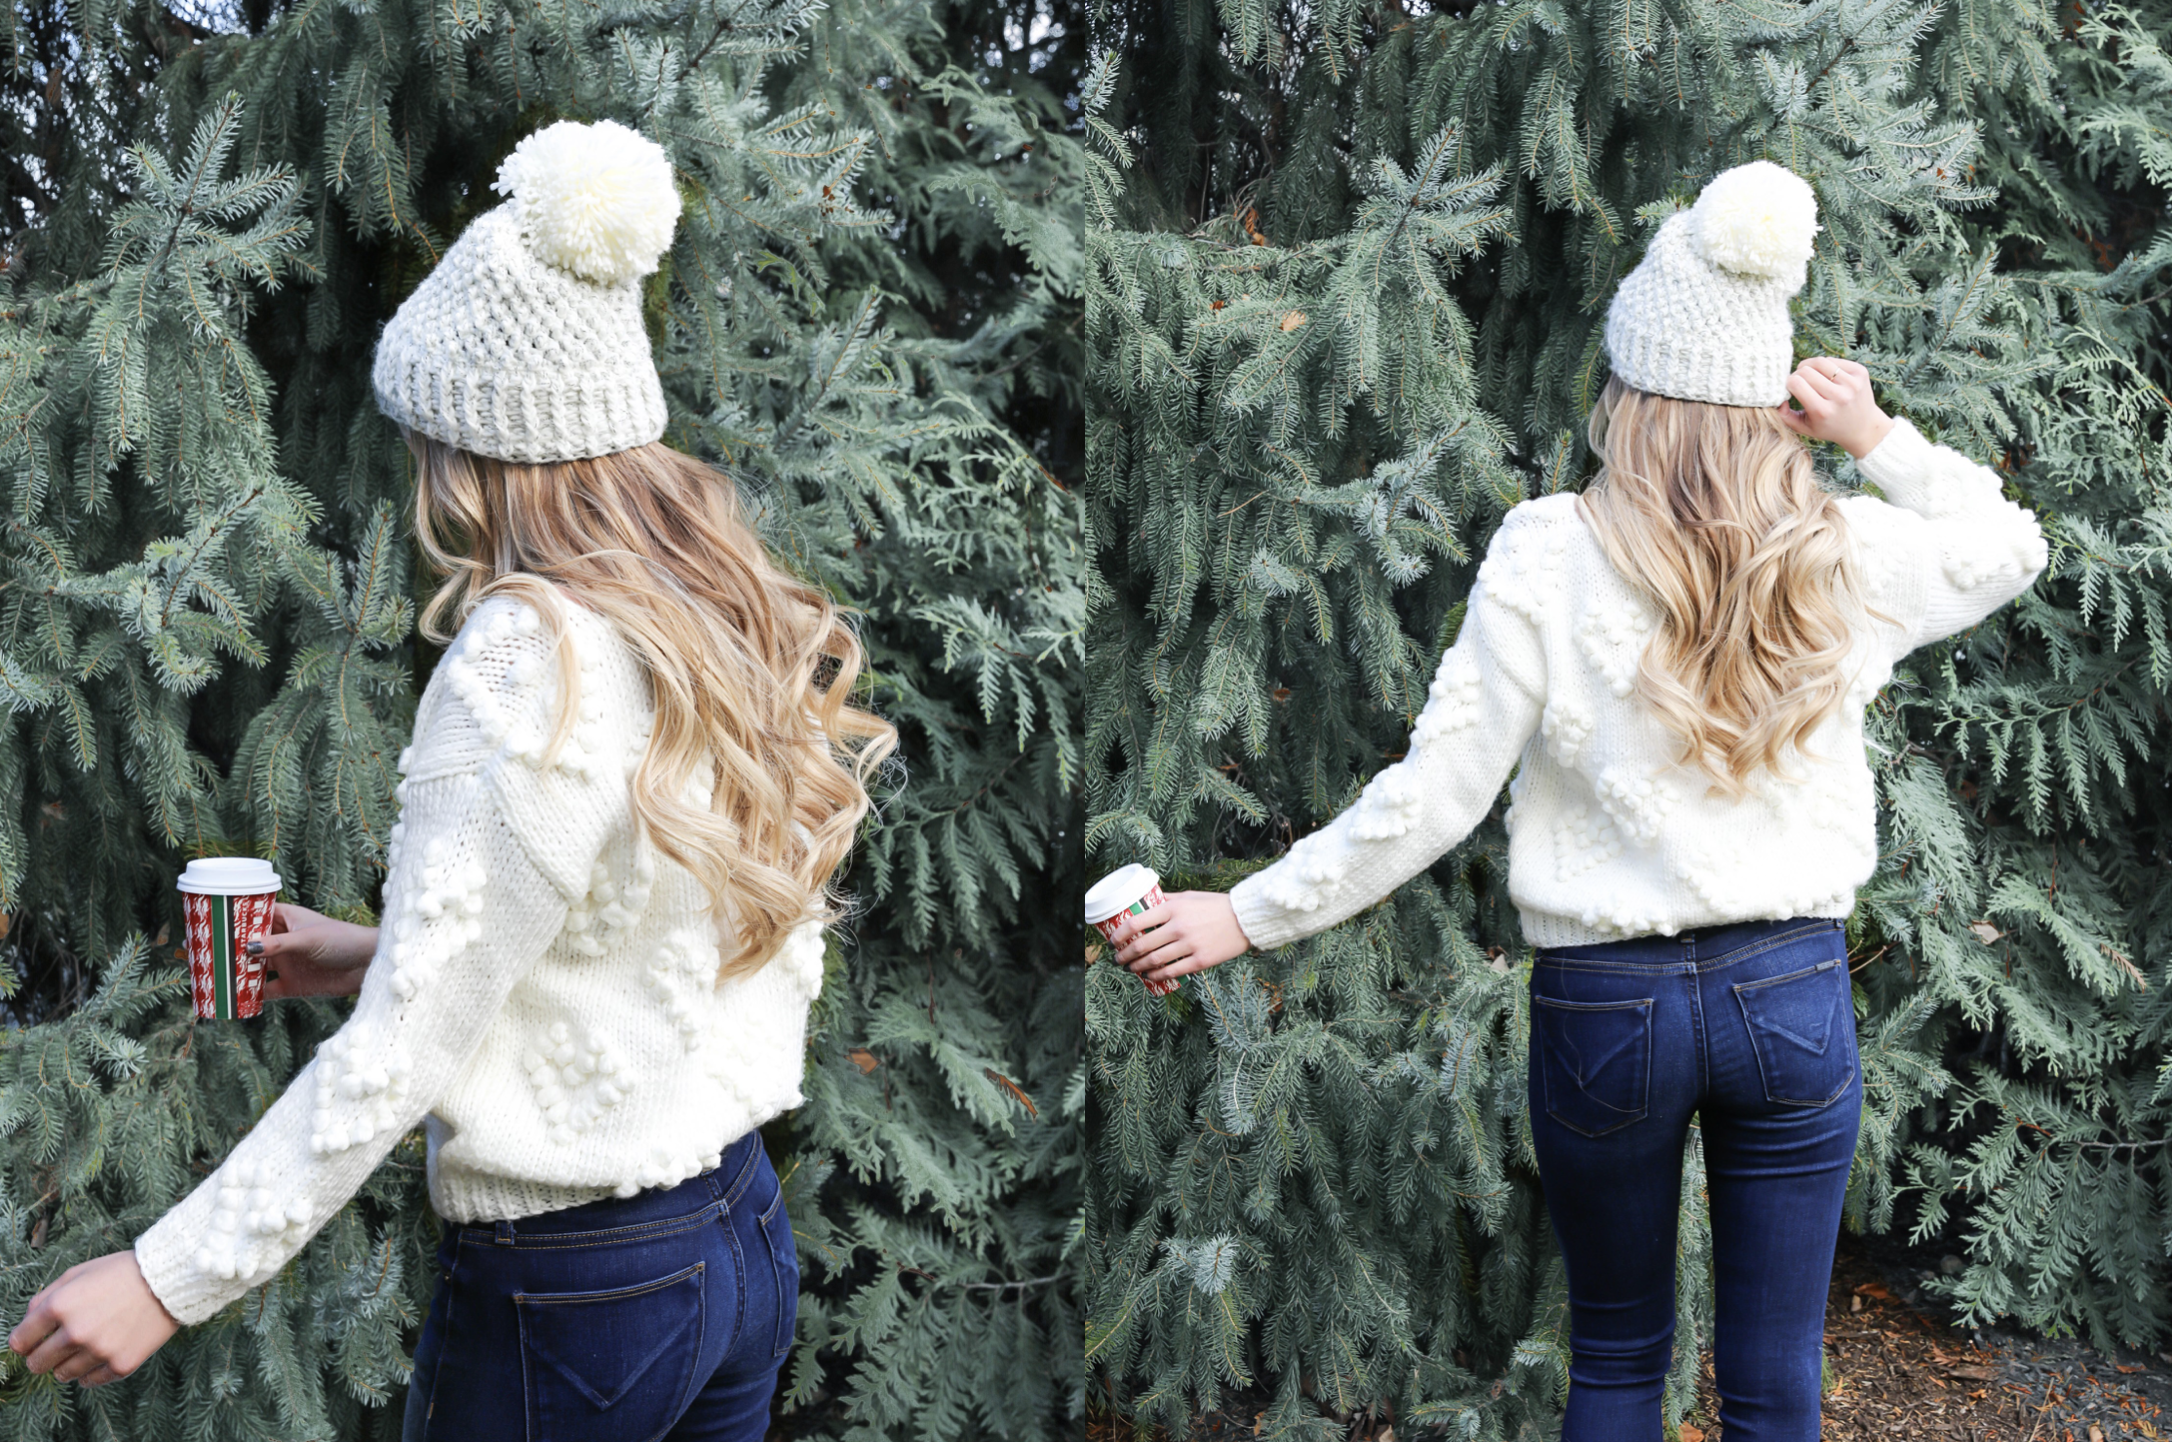 Christmas beanie roundup! The cutest winter hats that I am loving! Also wearing this cute chicwish heart pom sweater! Cute christmas tree photo idea! All details on fashion blog daily dose of charm by lauren lindmark